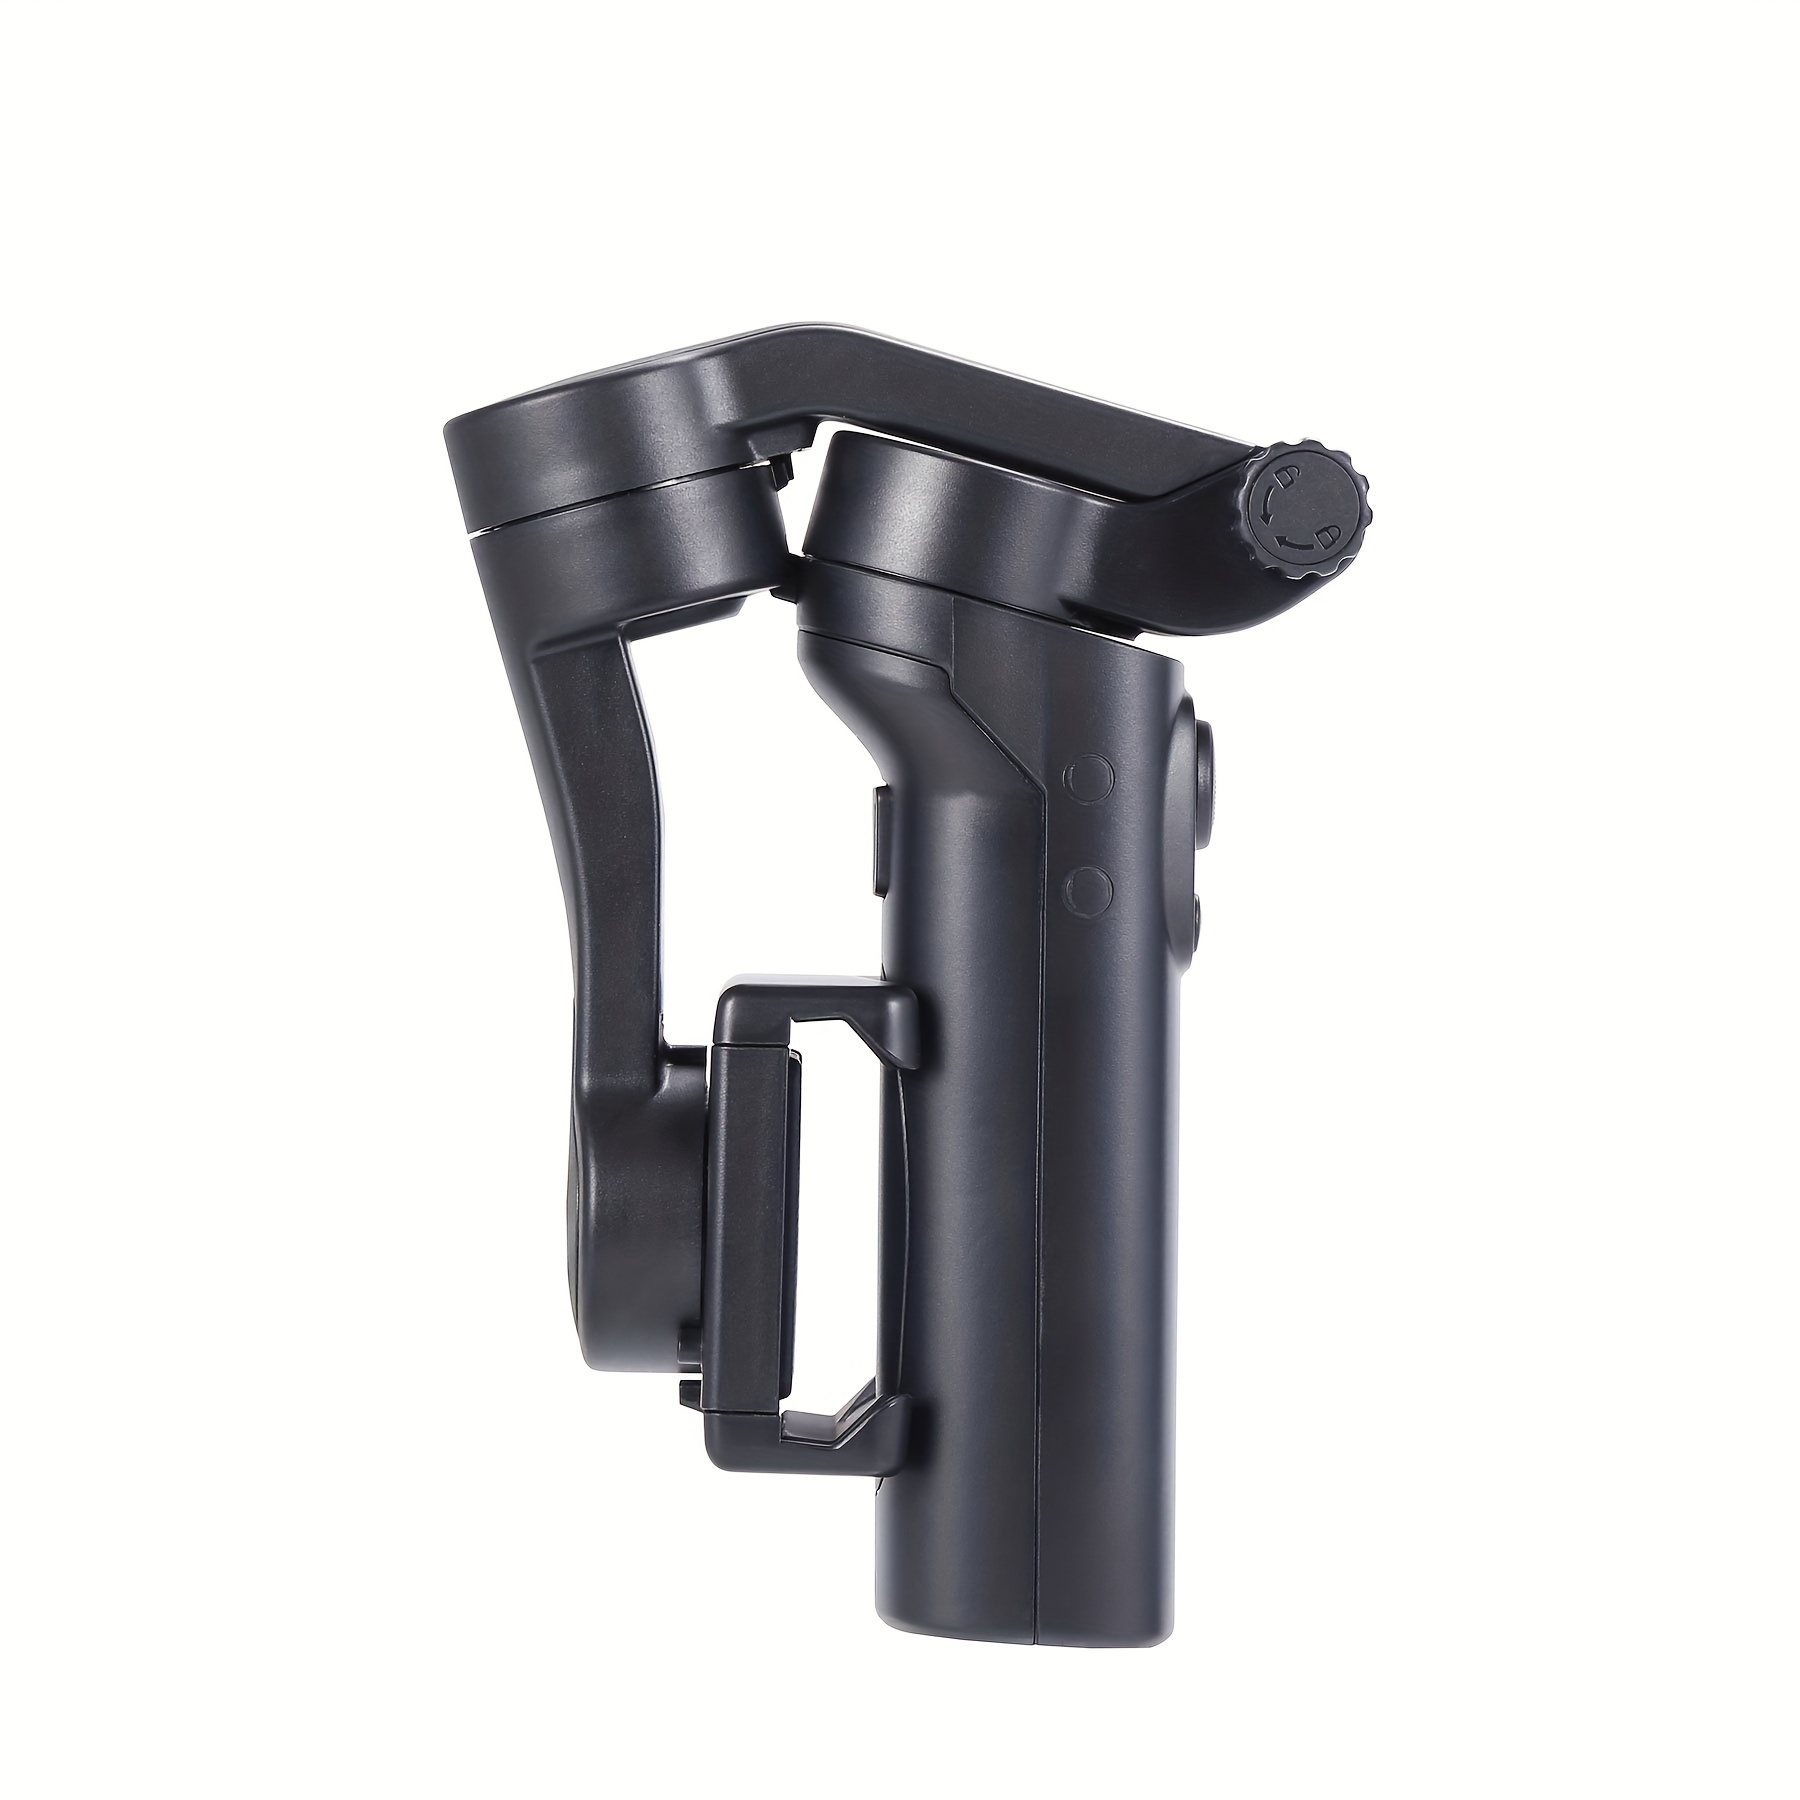 DJI OSMO Mobile 6 3-Axis Foldable Stabilizer Gimbal selfie for Smartphone  iPhone